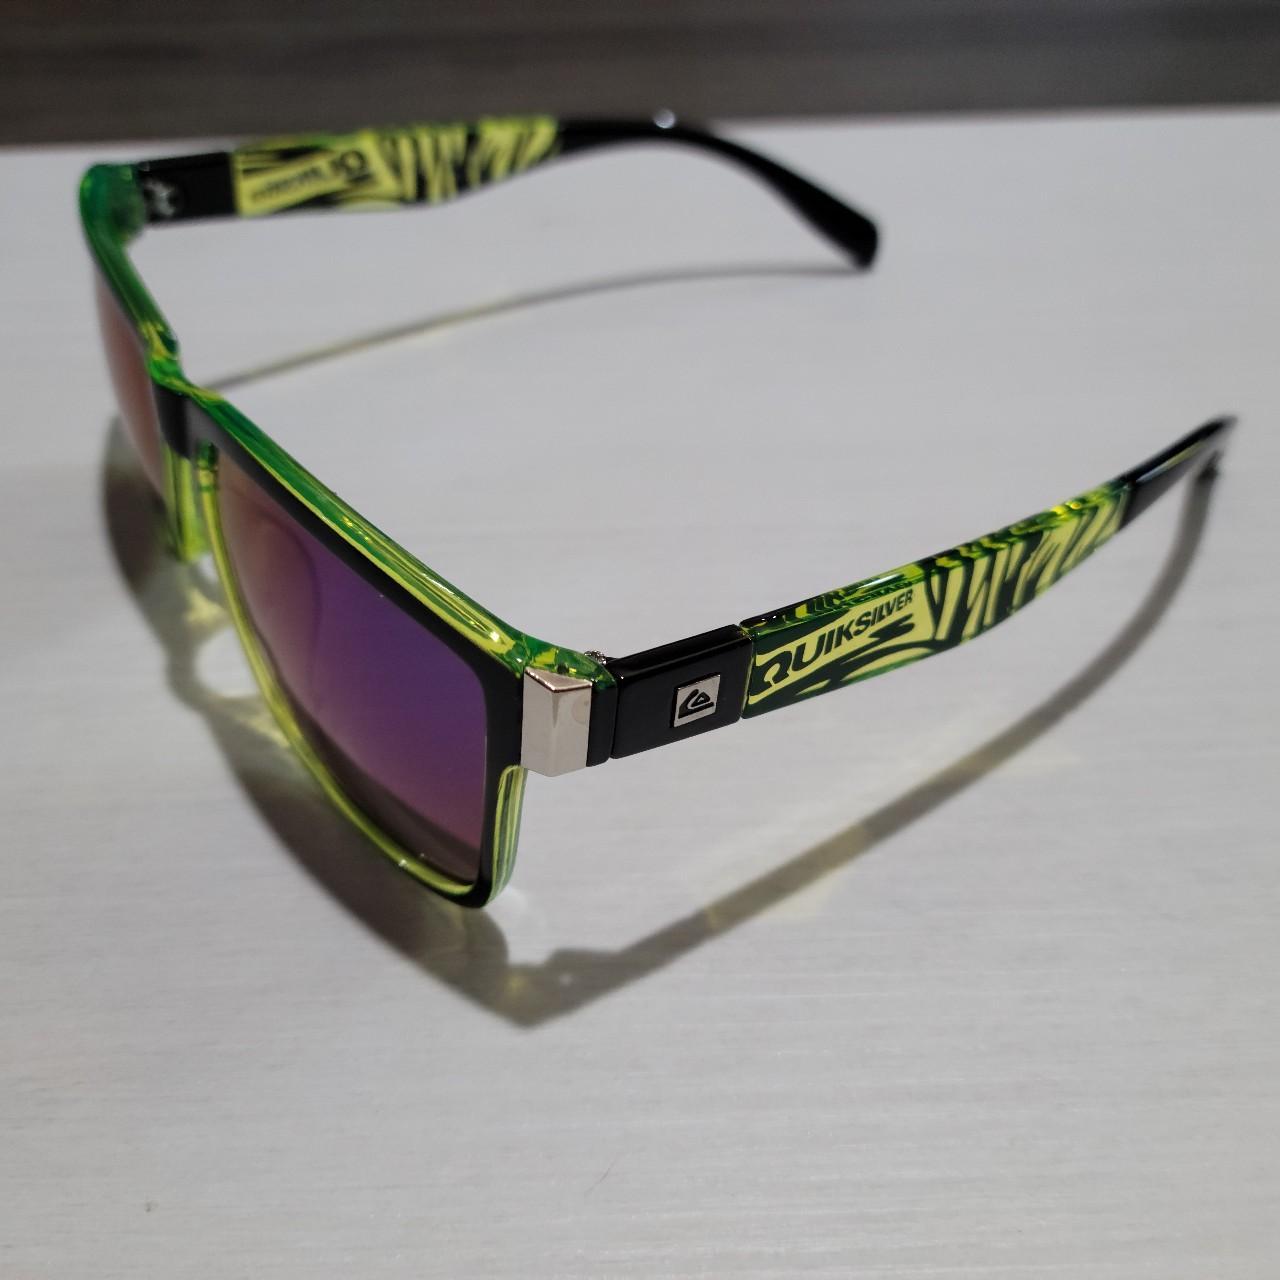 New polarized quiksilver sunglasses, green and black - Depop